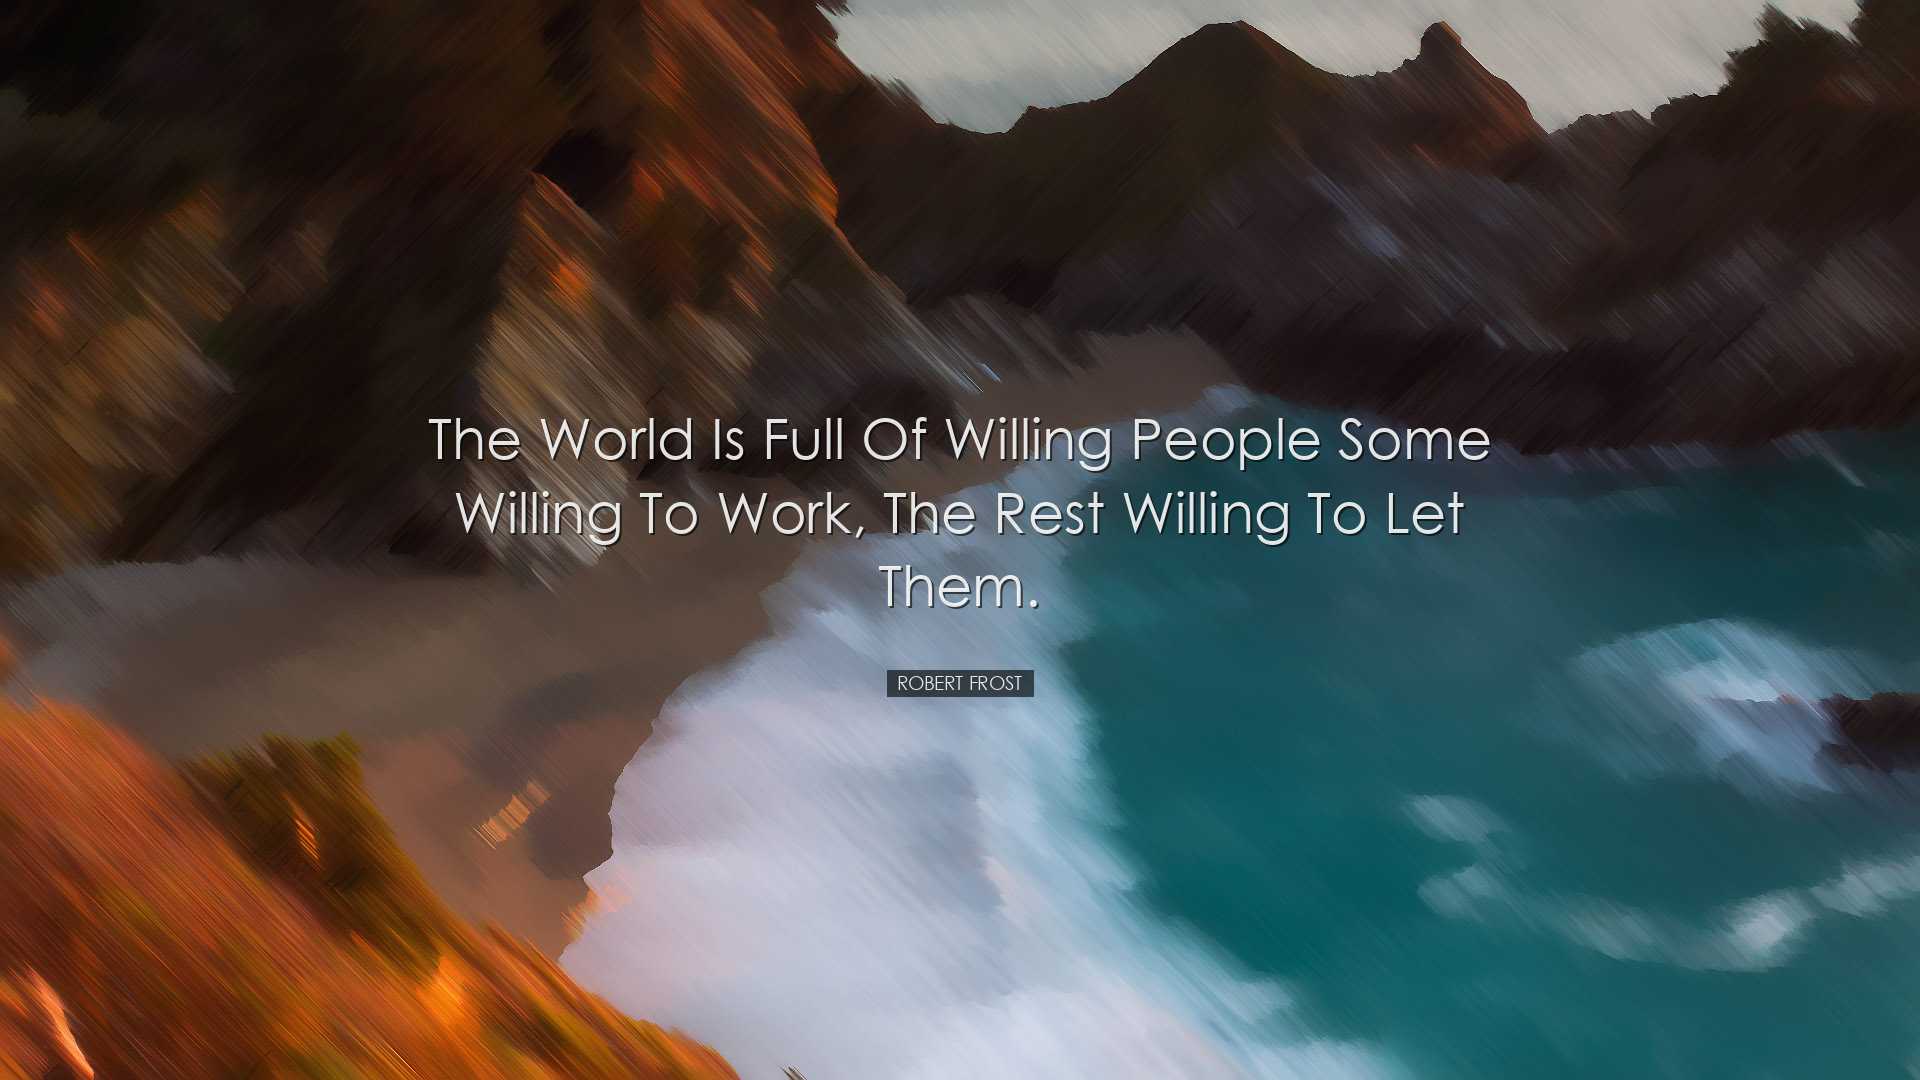 The world is full of willing people some willing to work, the rest